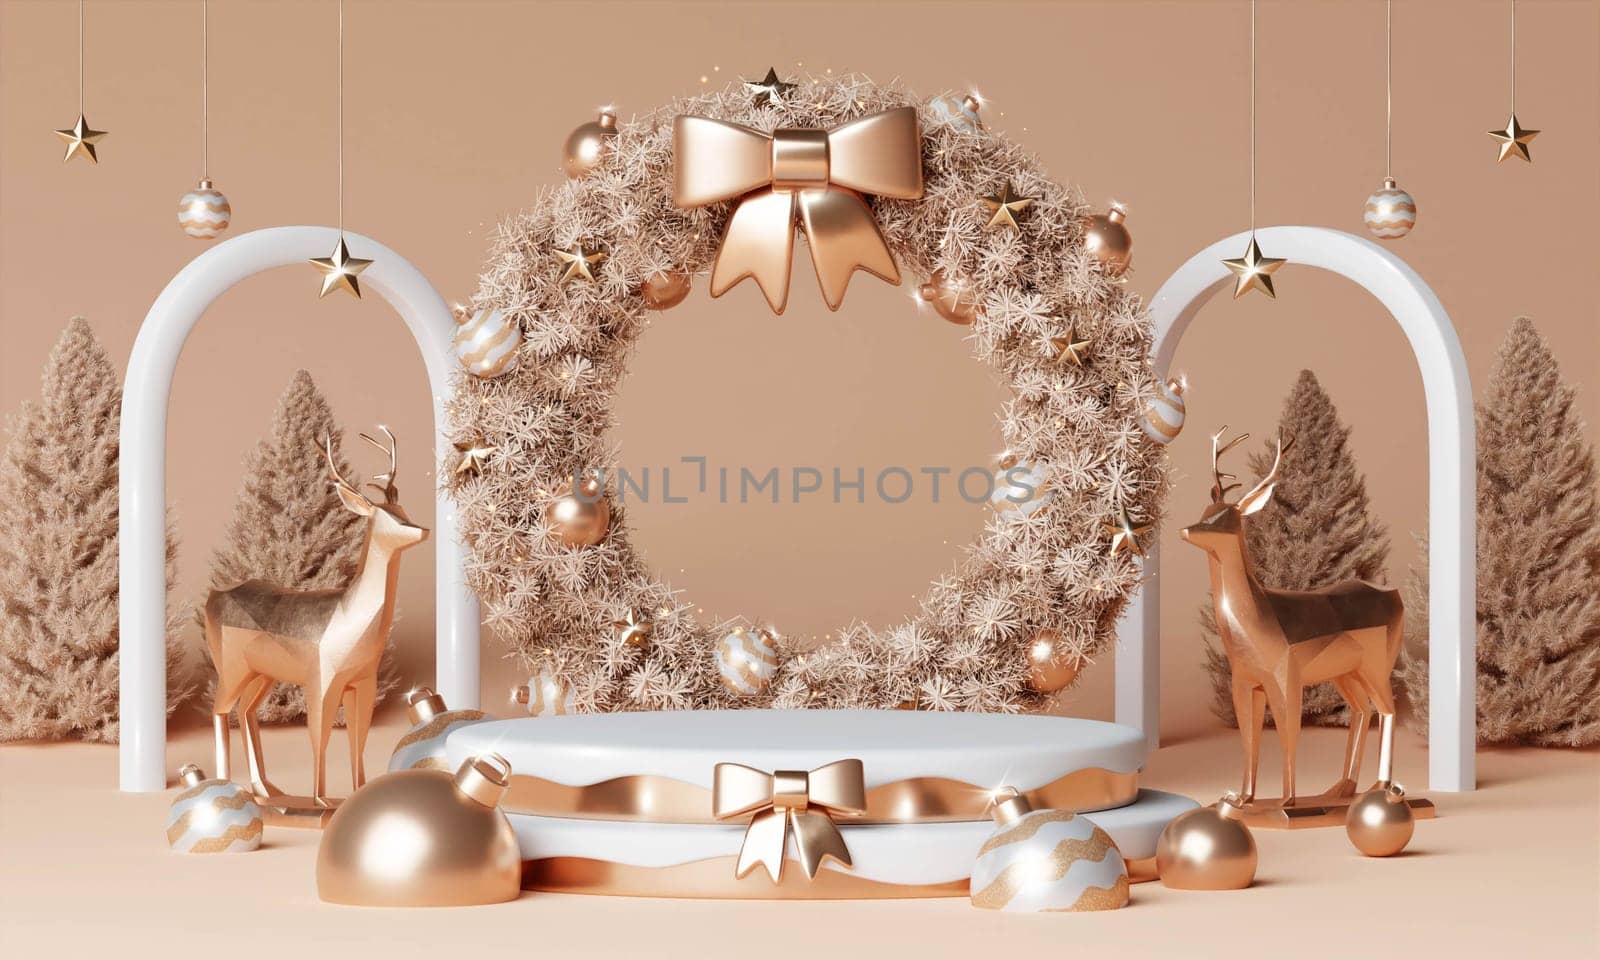 3d Christmas Wreath podium. Realistic 3d design stage podium. Decorative festive elements glass bauble balls. Xmas holiday template podium. by meepiangraphic